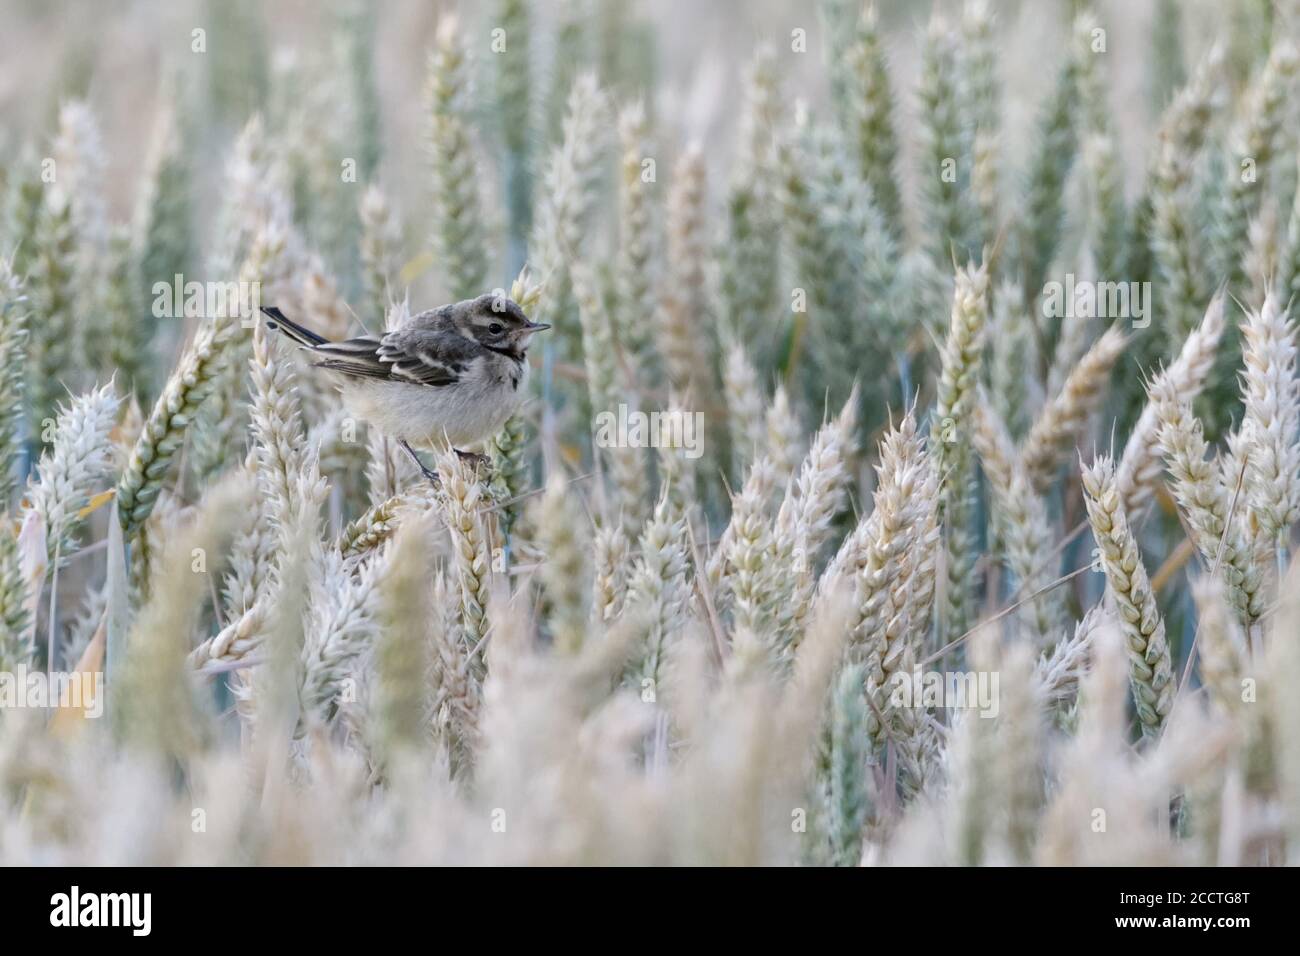 Yellow Wagtail ( Motacilla flava ), young fledged bird, chick, juvenile, perched on ripe wheat crops, sitting in a grain field, wildlife, Europe. Stock Photo